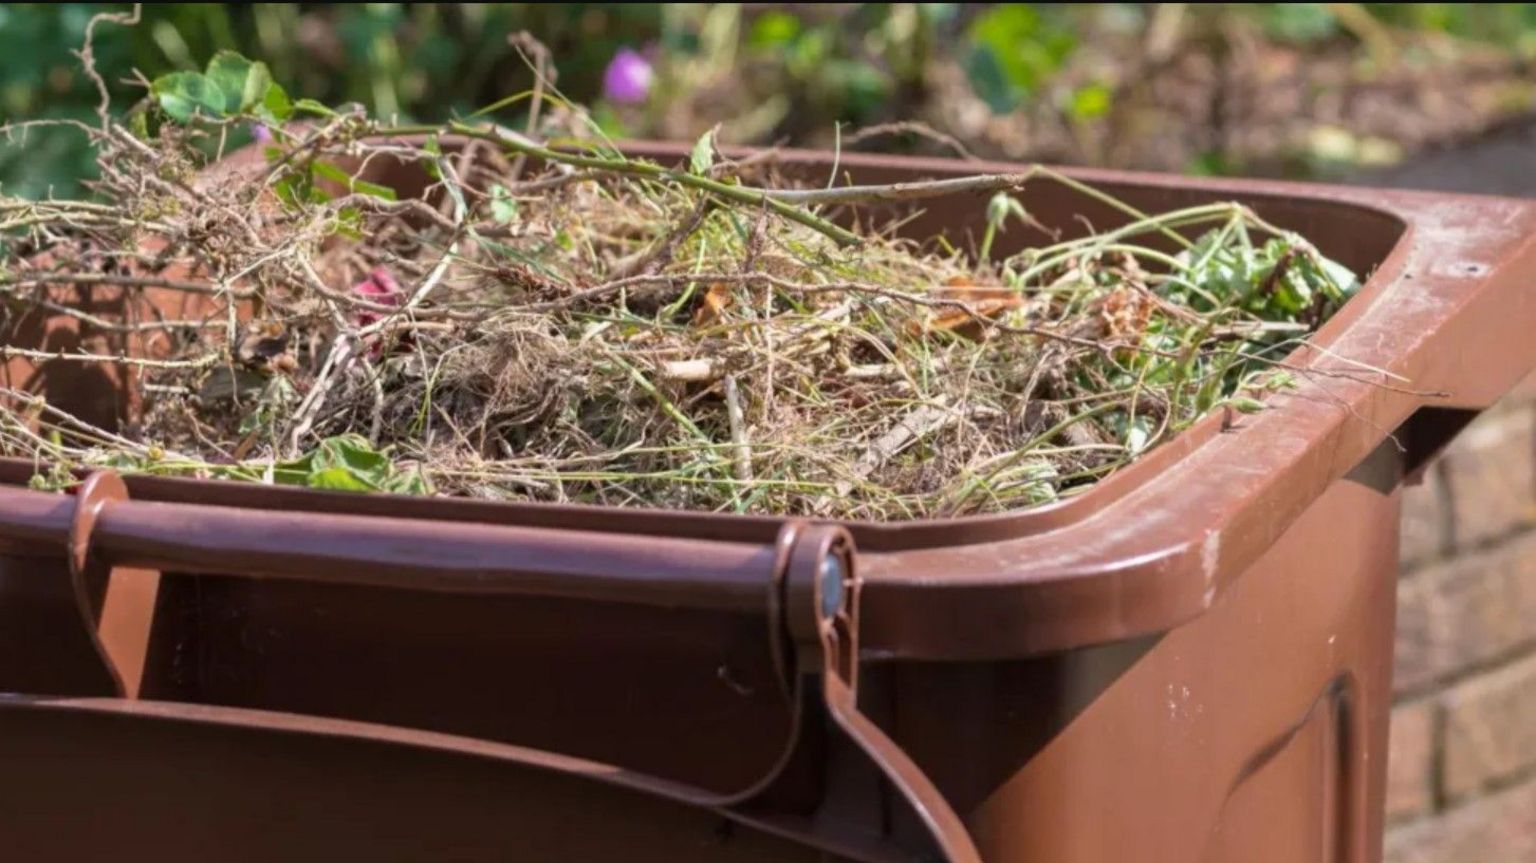 Brown bin in a garden with twigs and leaves